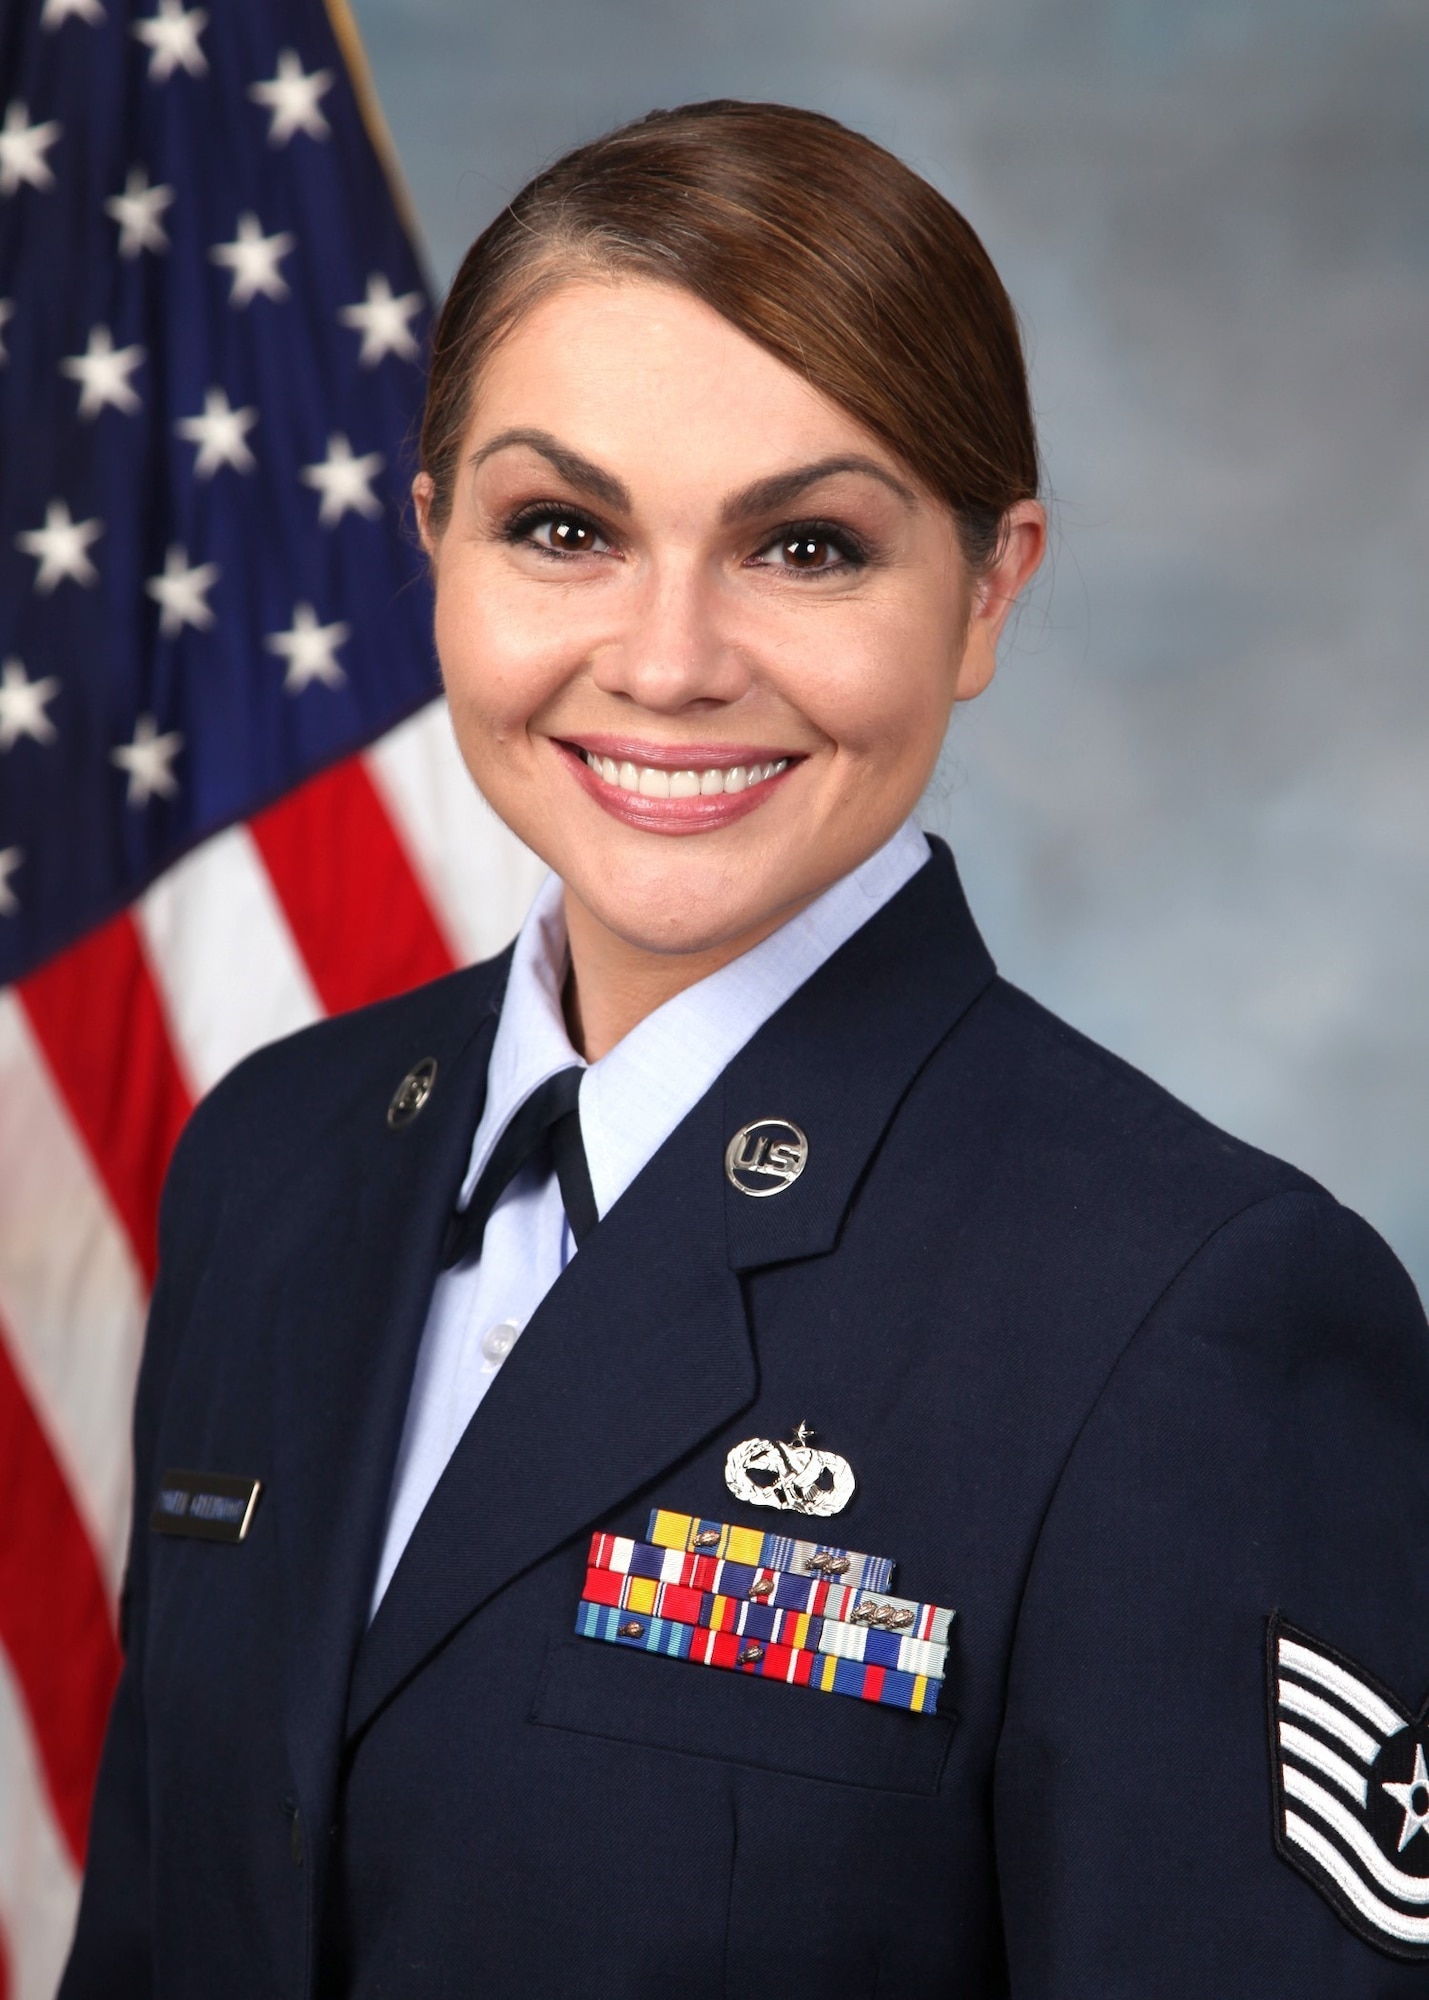 Studio portrait photo of Air Force senior noncommissioned officer.